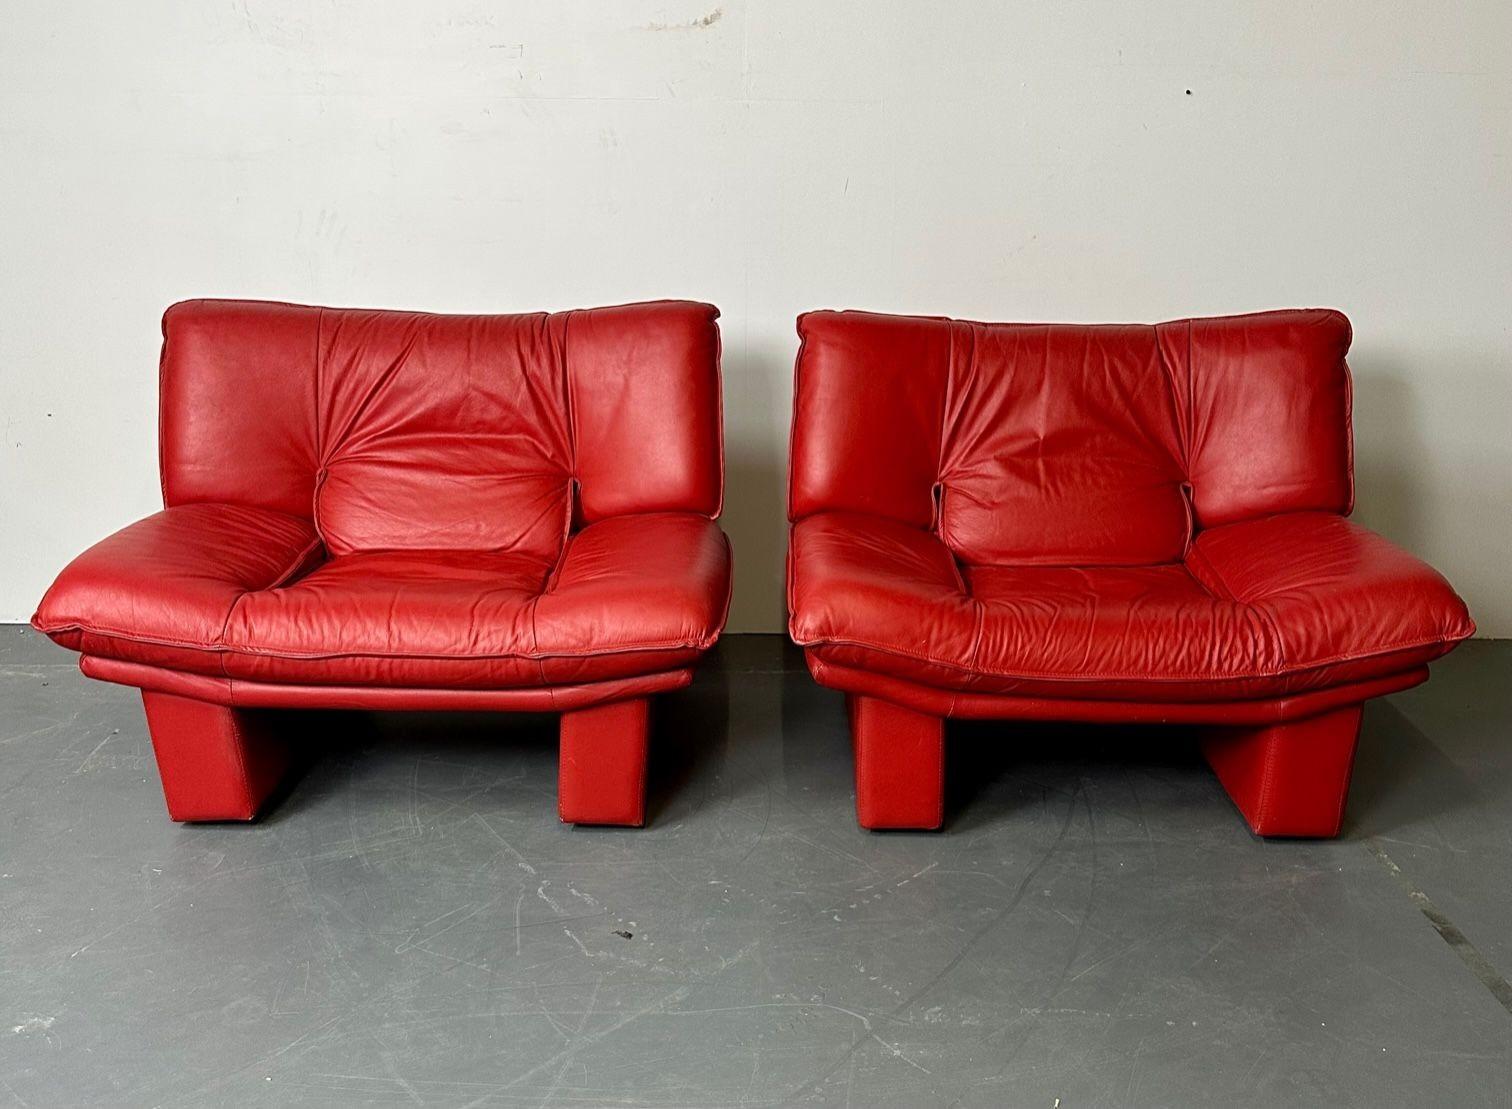 Italian Modern Leather Pair of Arm, Lounge Chairs, Bitonto, Red Leather 1